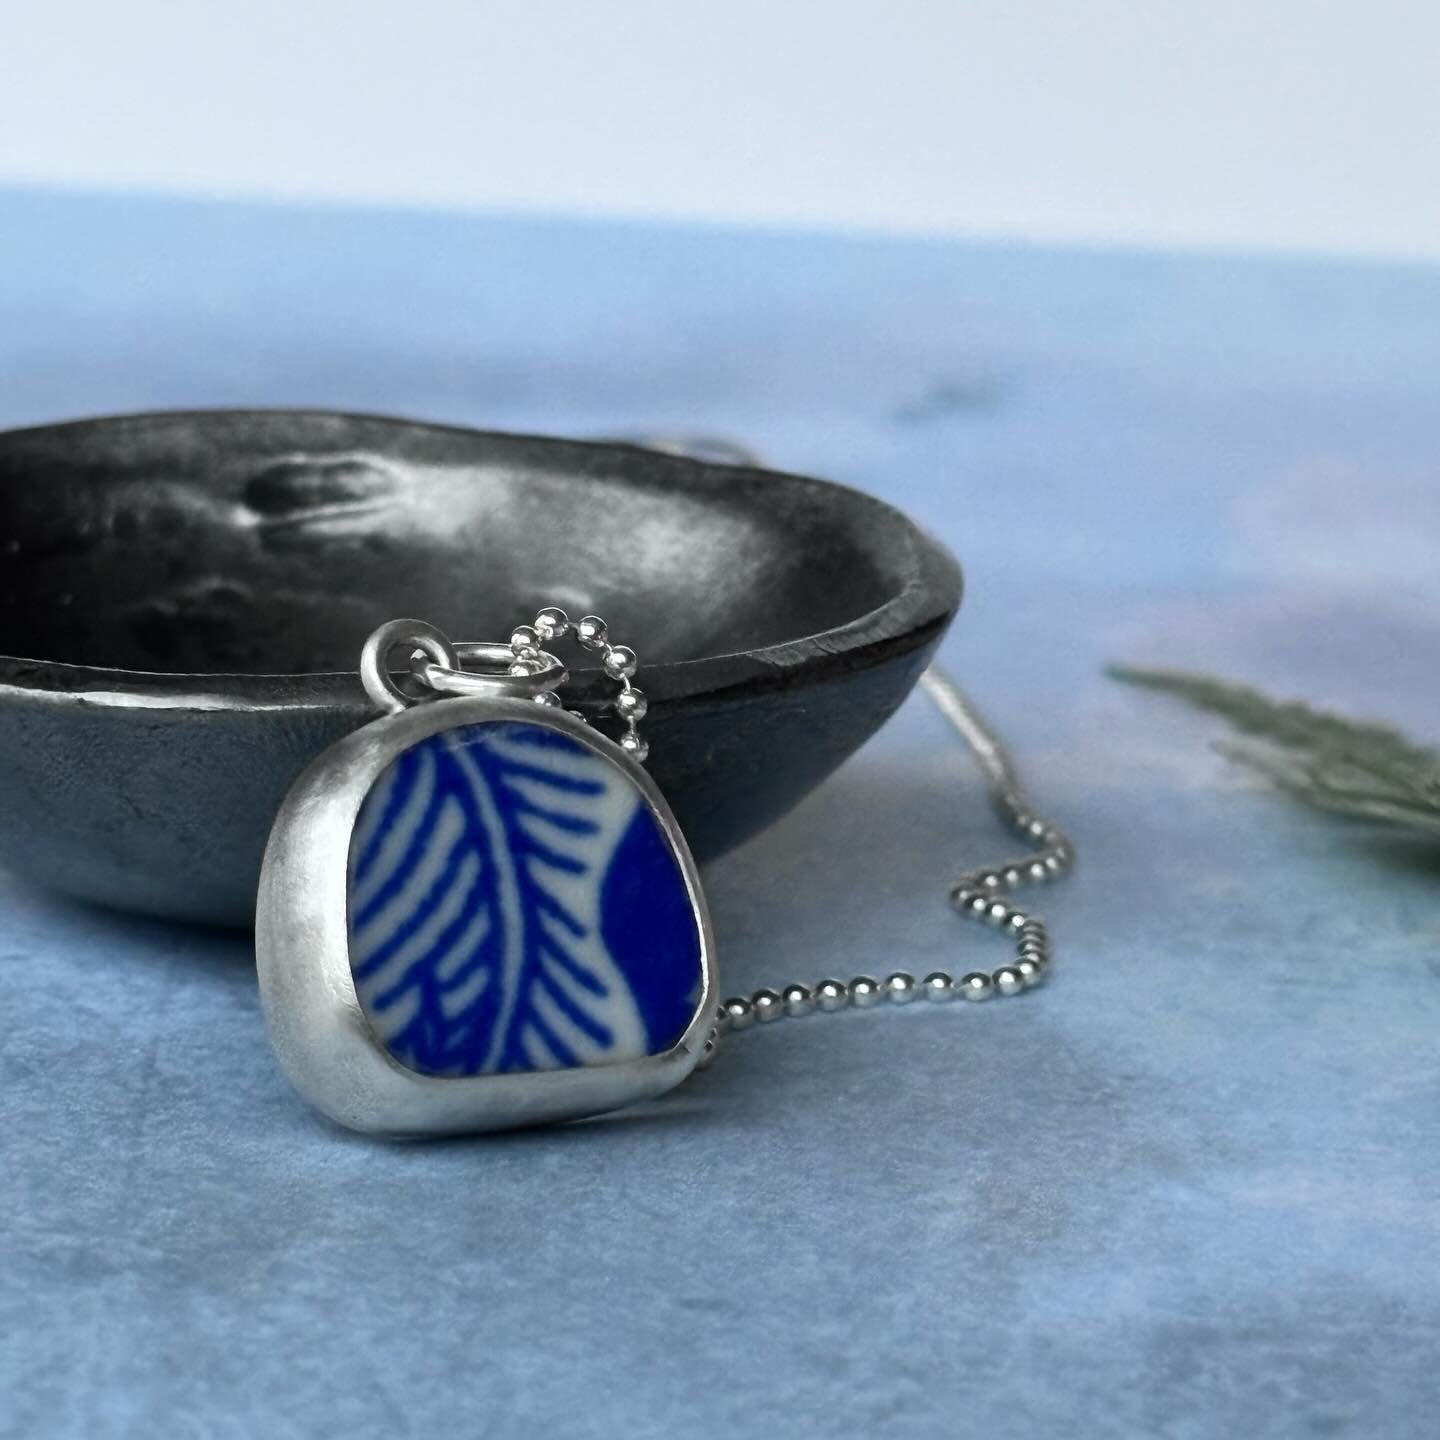 A piece of broken pottery set in sterling silver. I&rsquo;m really enjoying working with a different medium at the moment. #potteryjewelry #porcelainjewelry #handmadejewelry #jeanetteblix